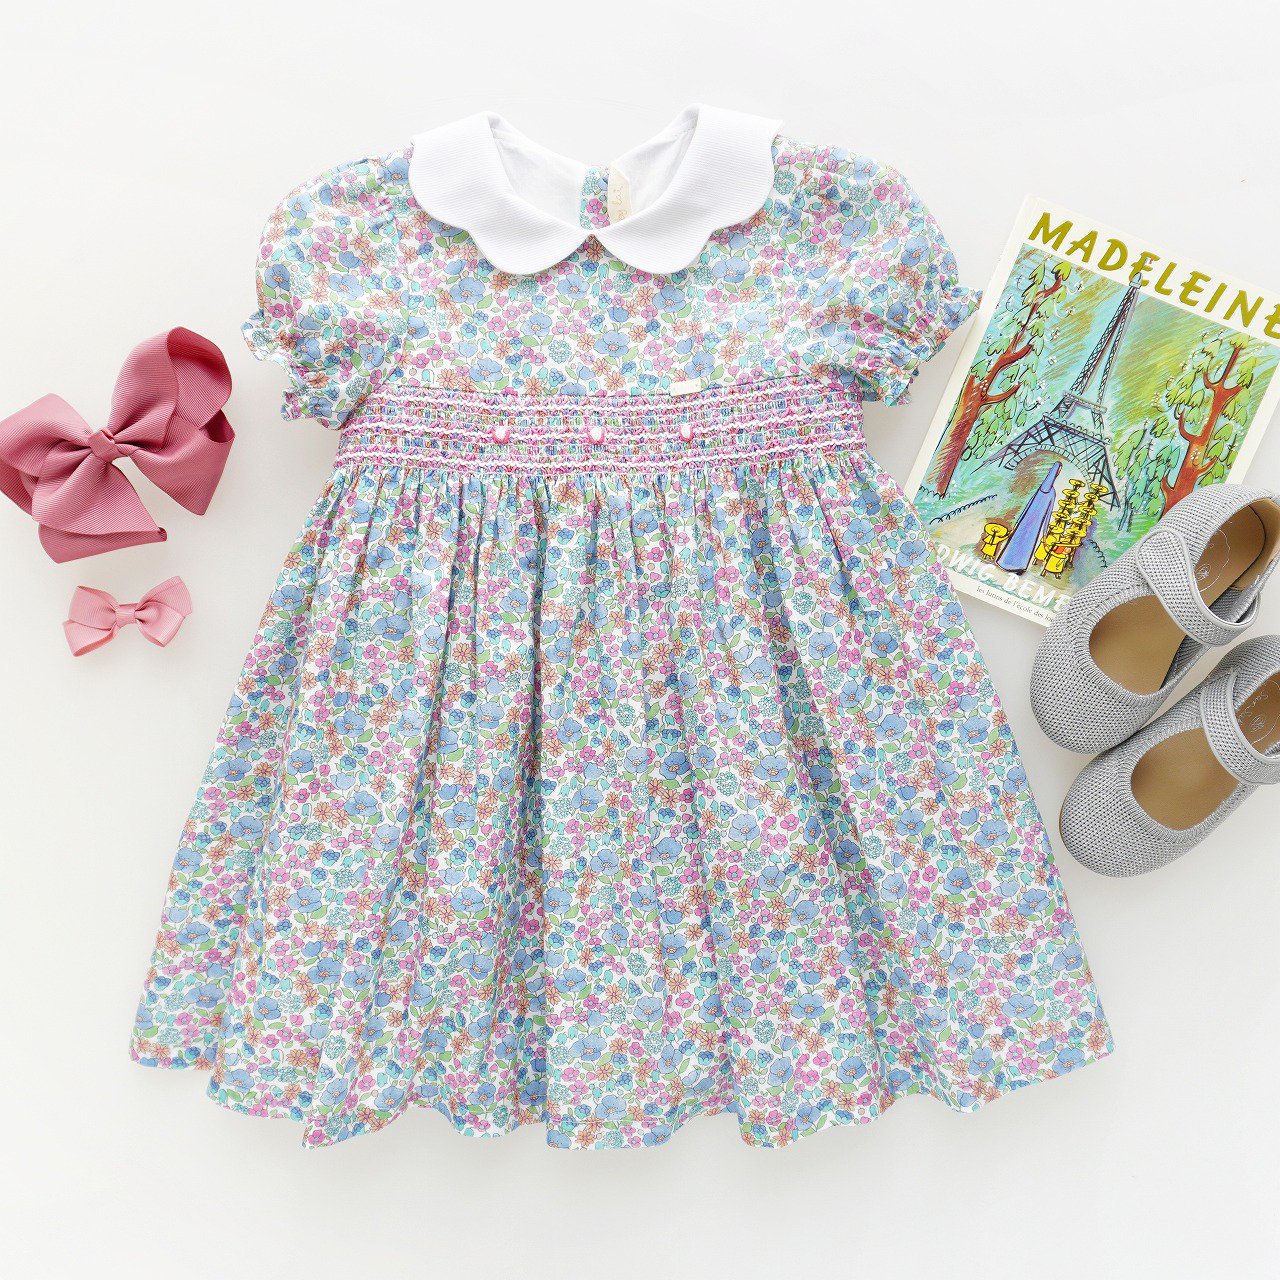 <img class='new_mark_img1' src='https://img.shop-pro.jp/img/new/icons1.gif' style='border:none;display:inline;margin:0px;padding:0px;width:auto;' />Laivicar / baby Lai - Scallop smocked dress